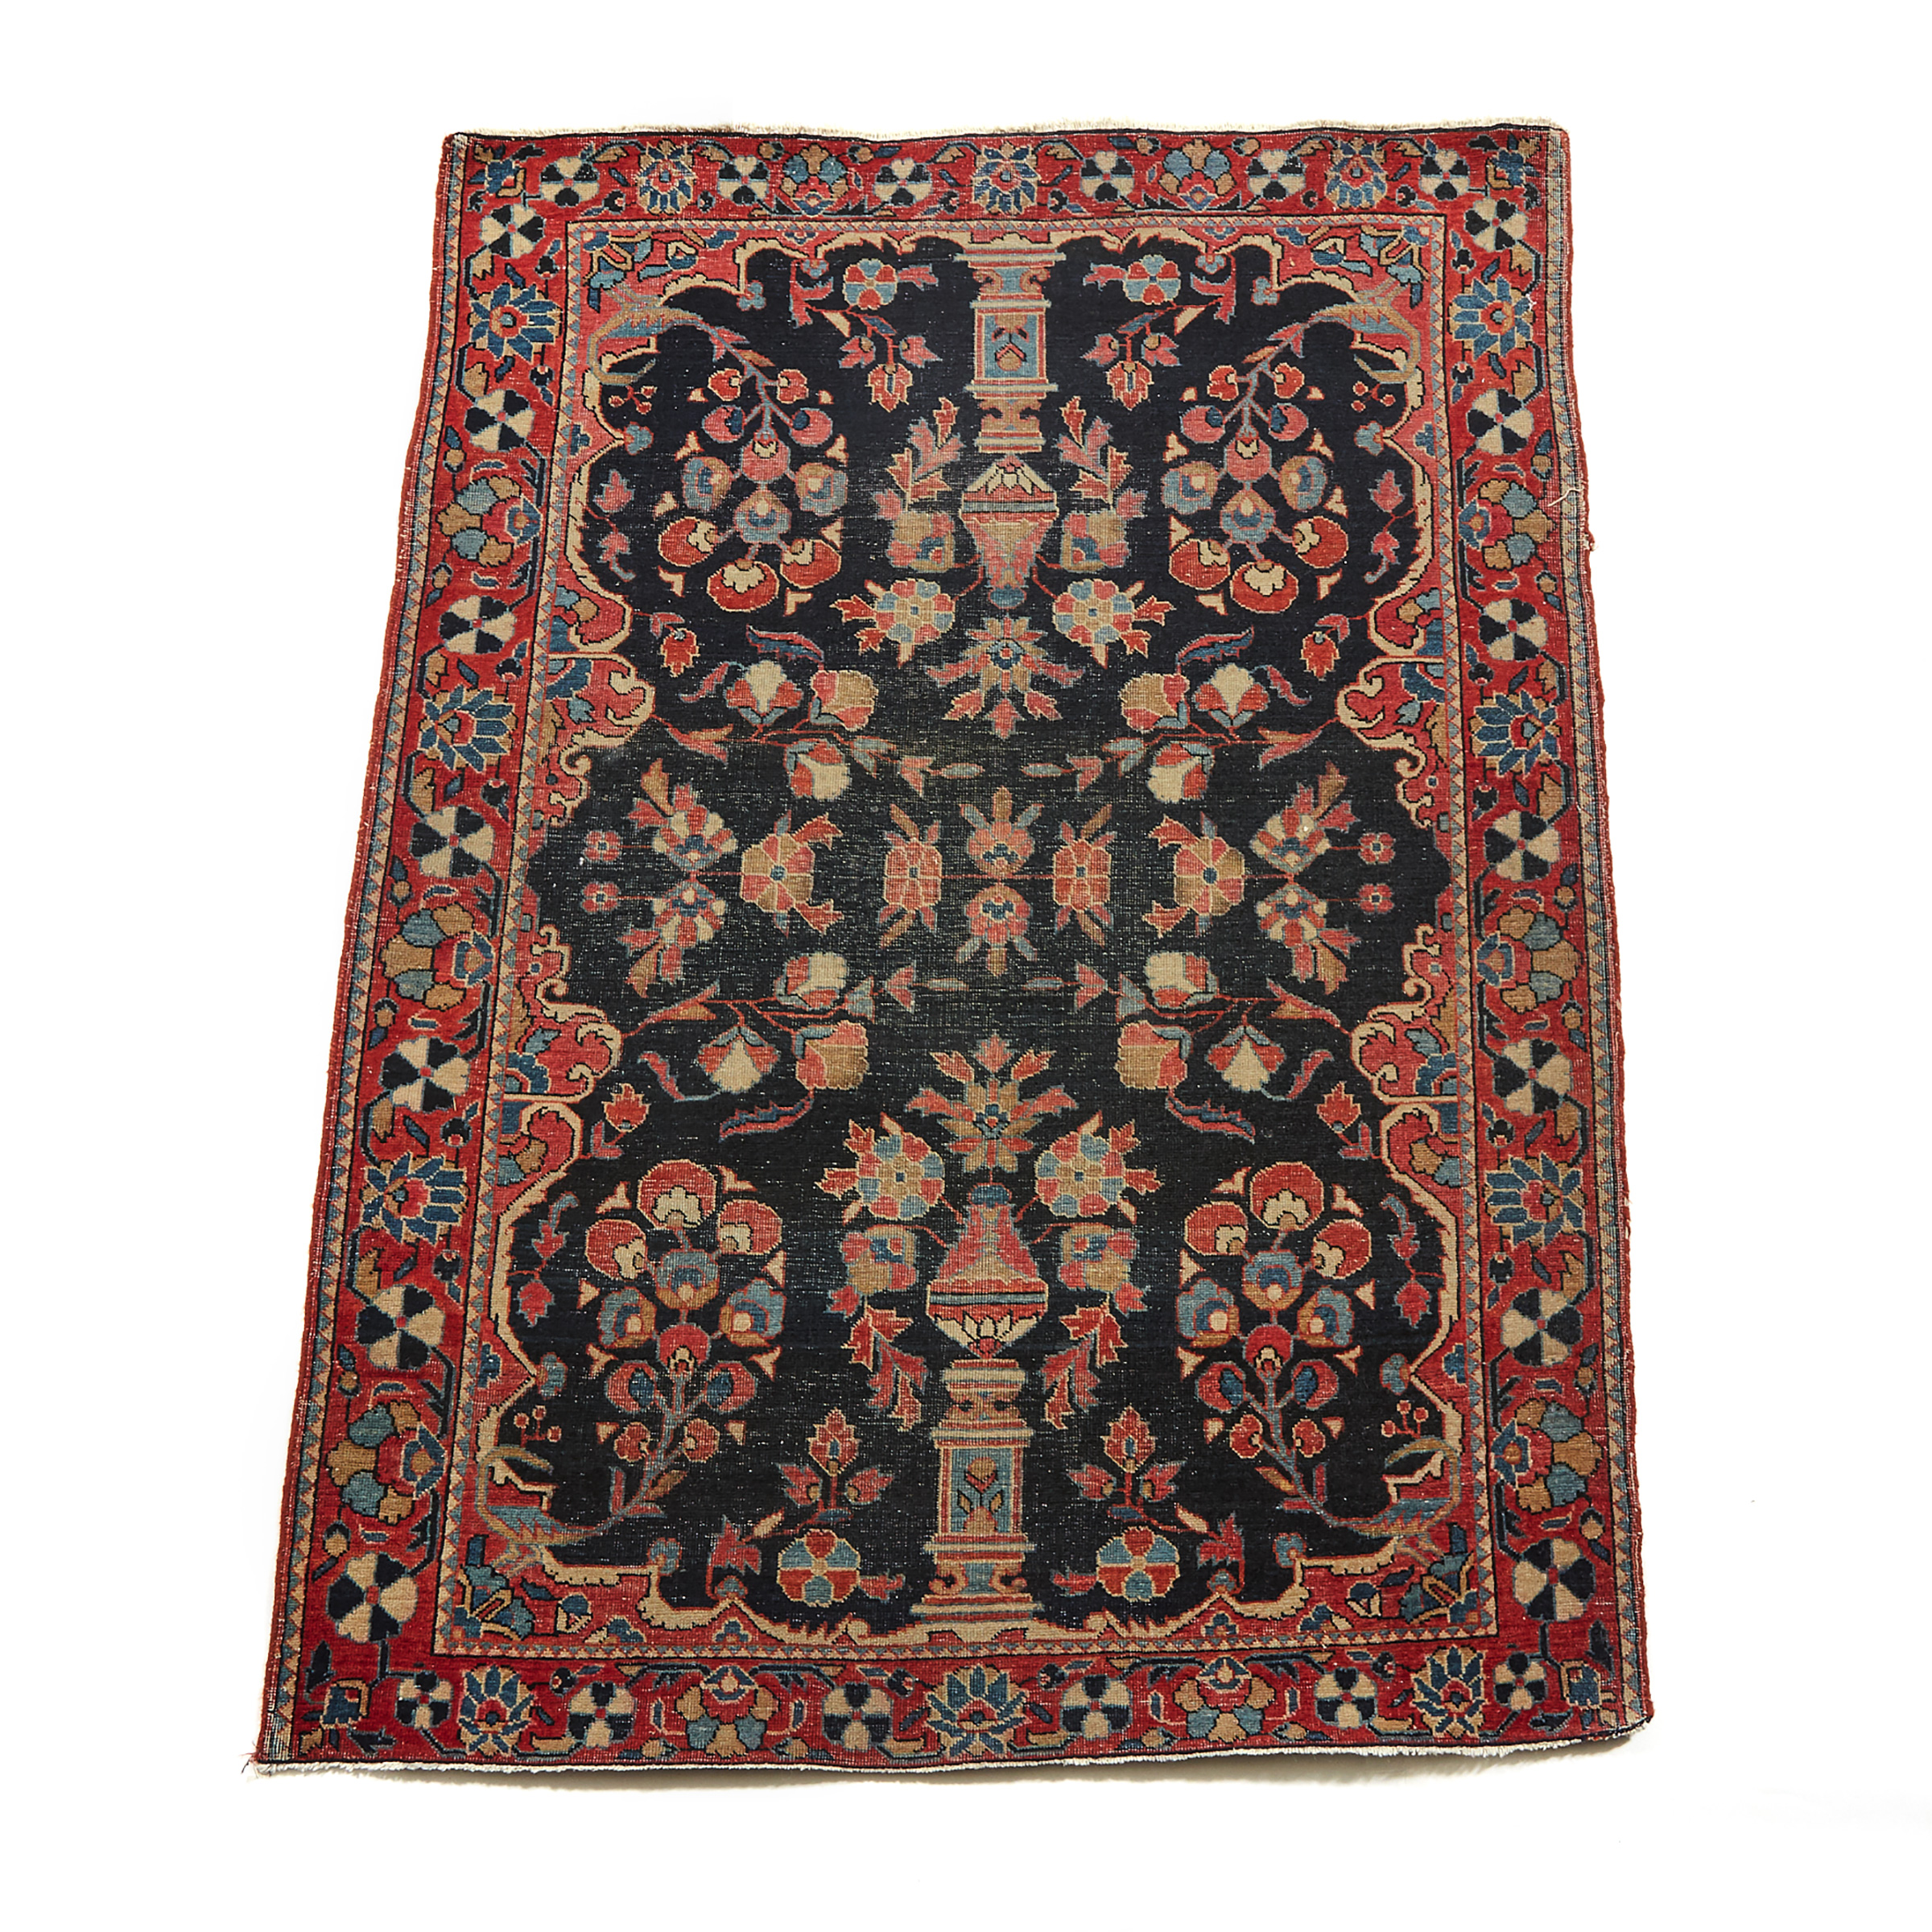 Sarouk Rug, Persian, early to mid 20th century